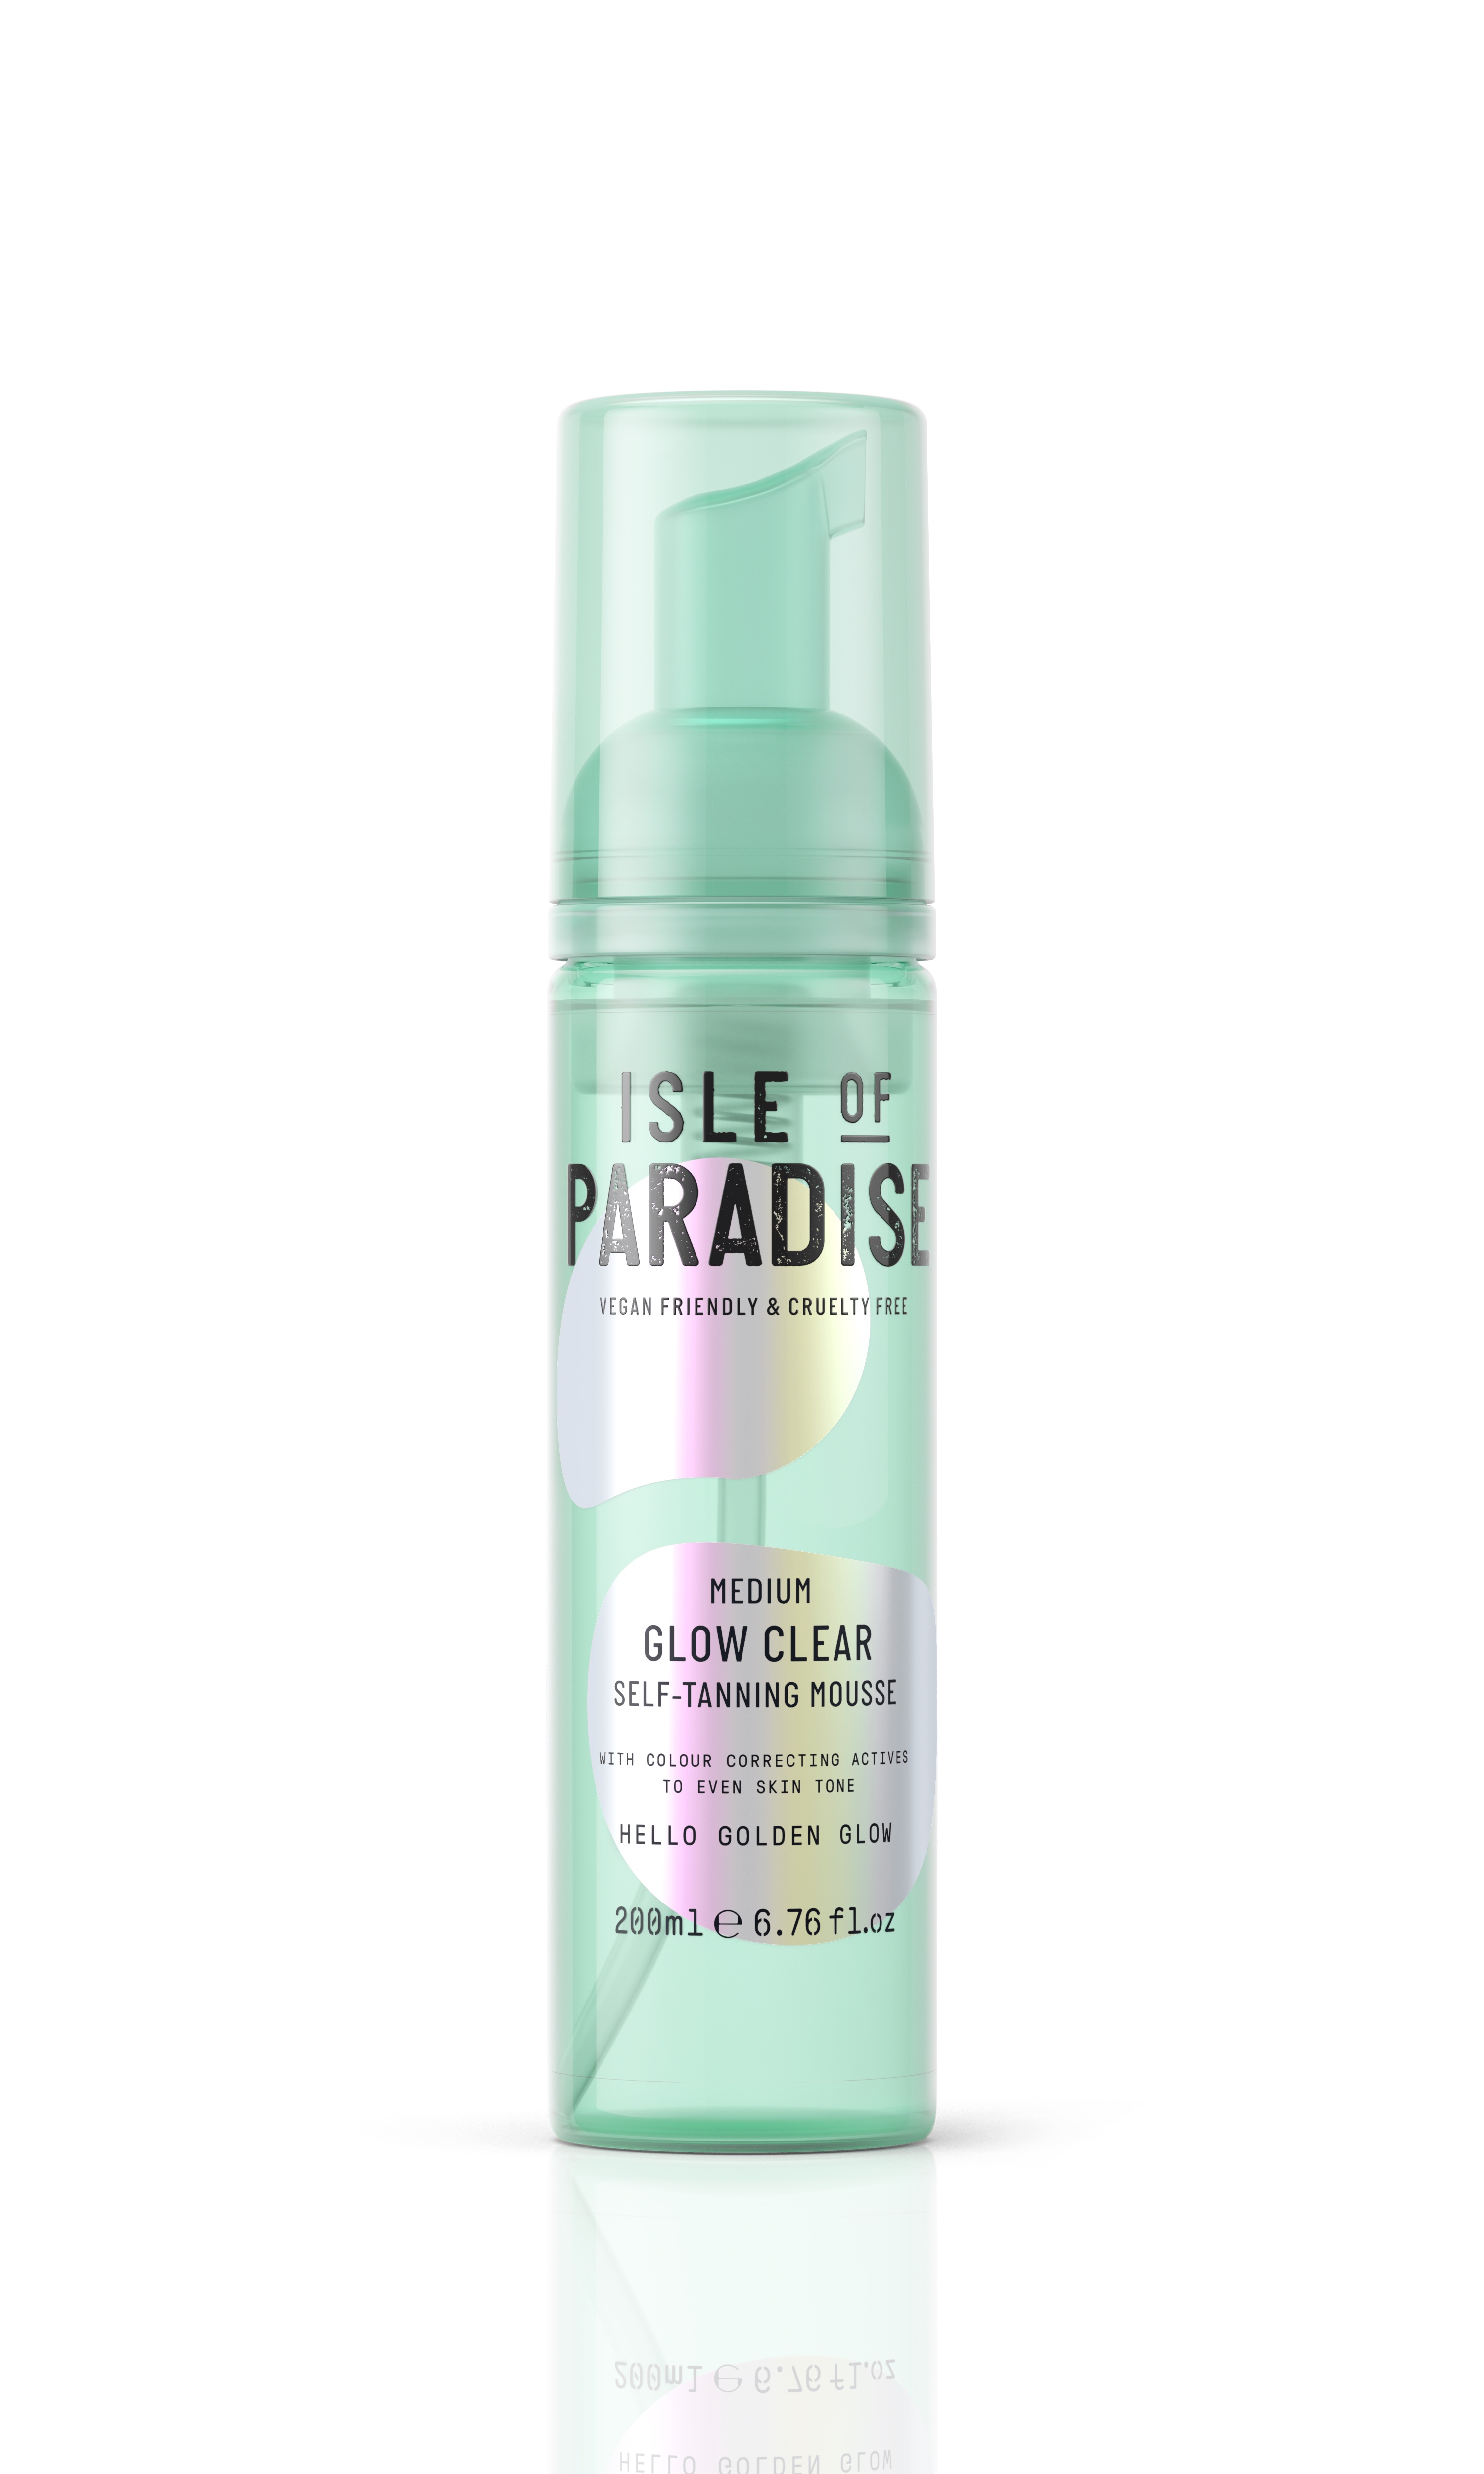  Glow Clear Self-Tanning Mousse